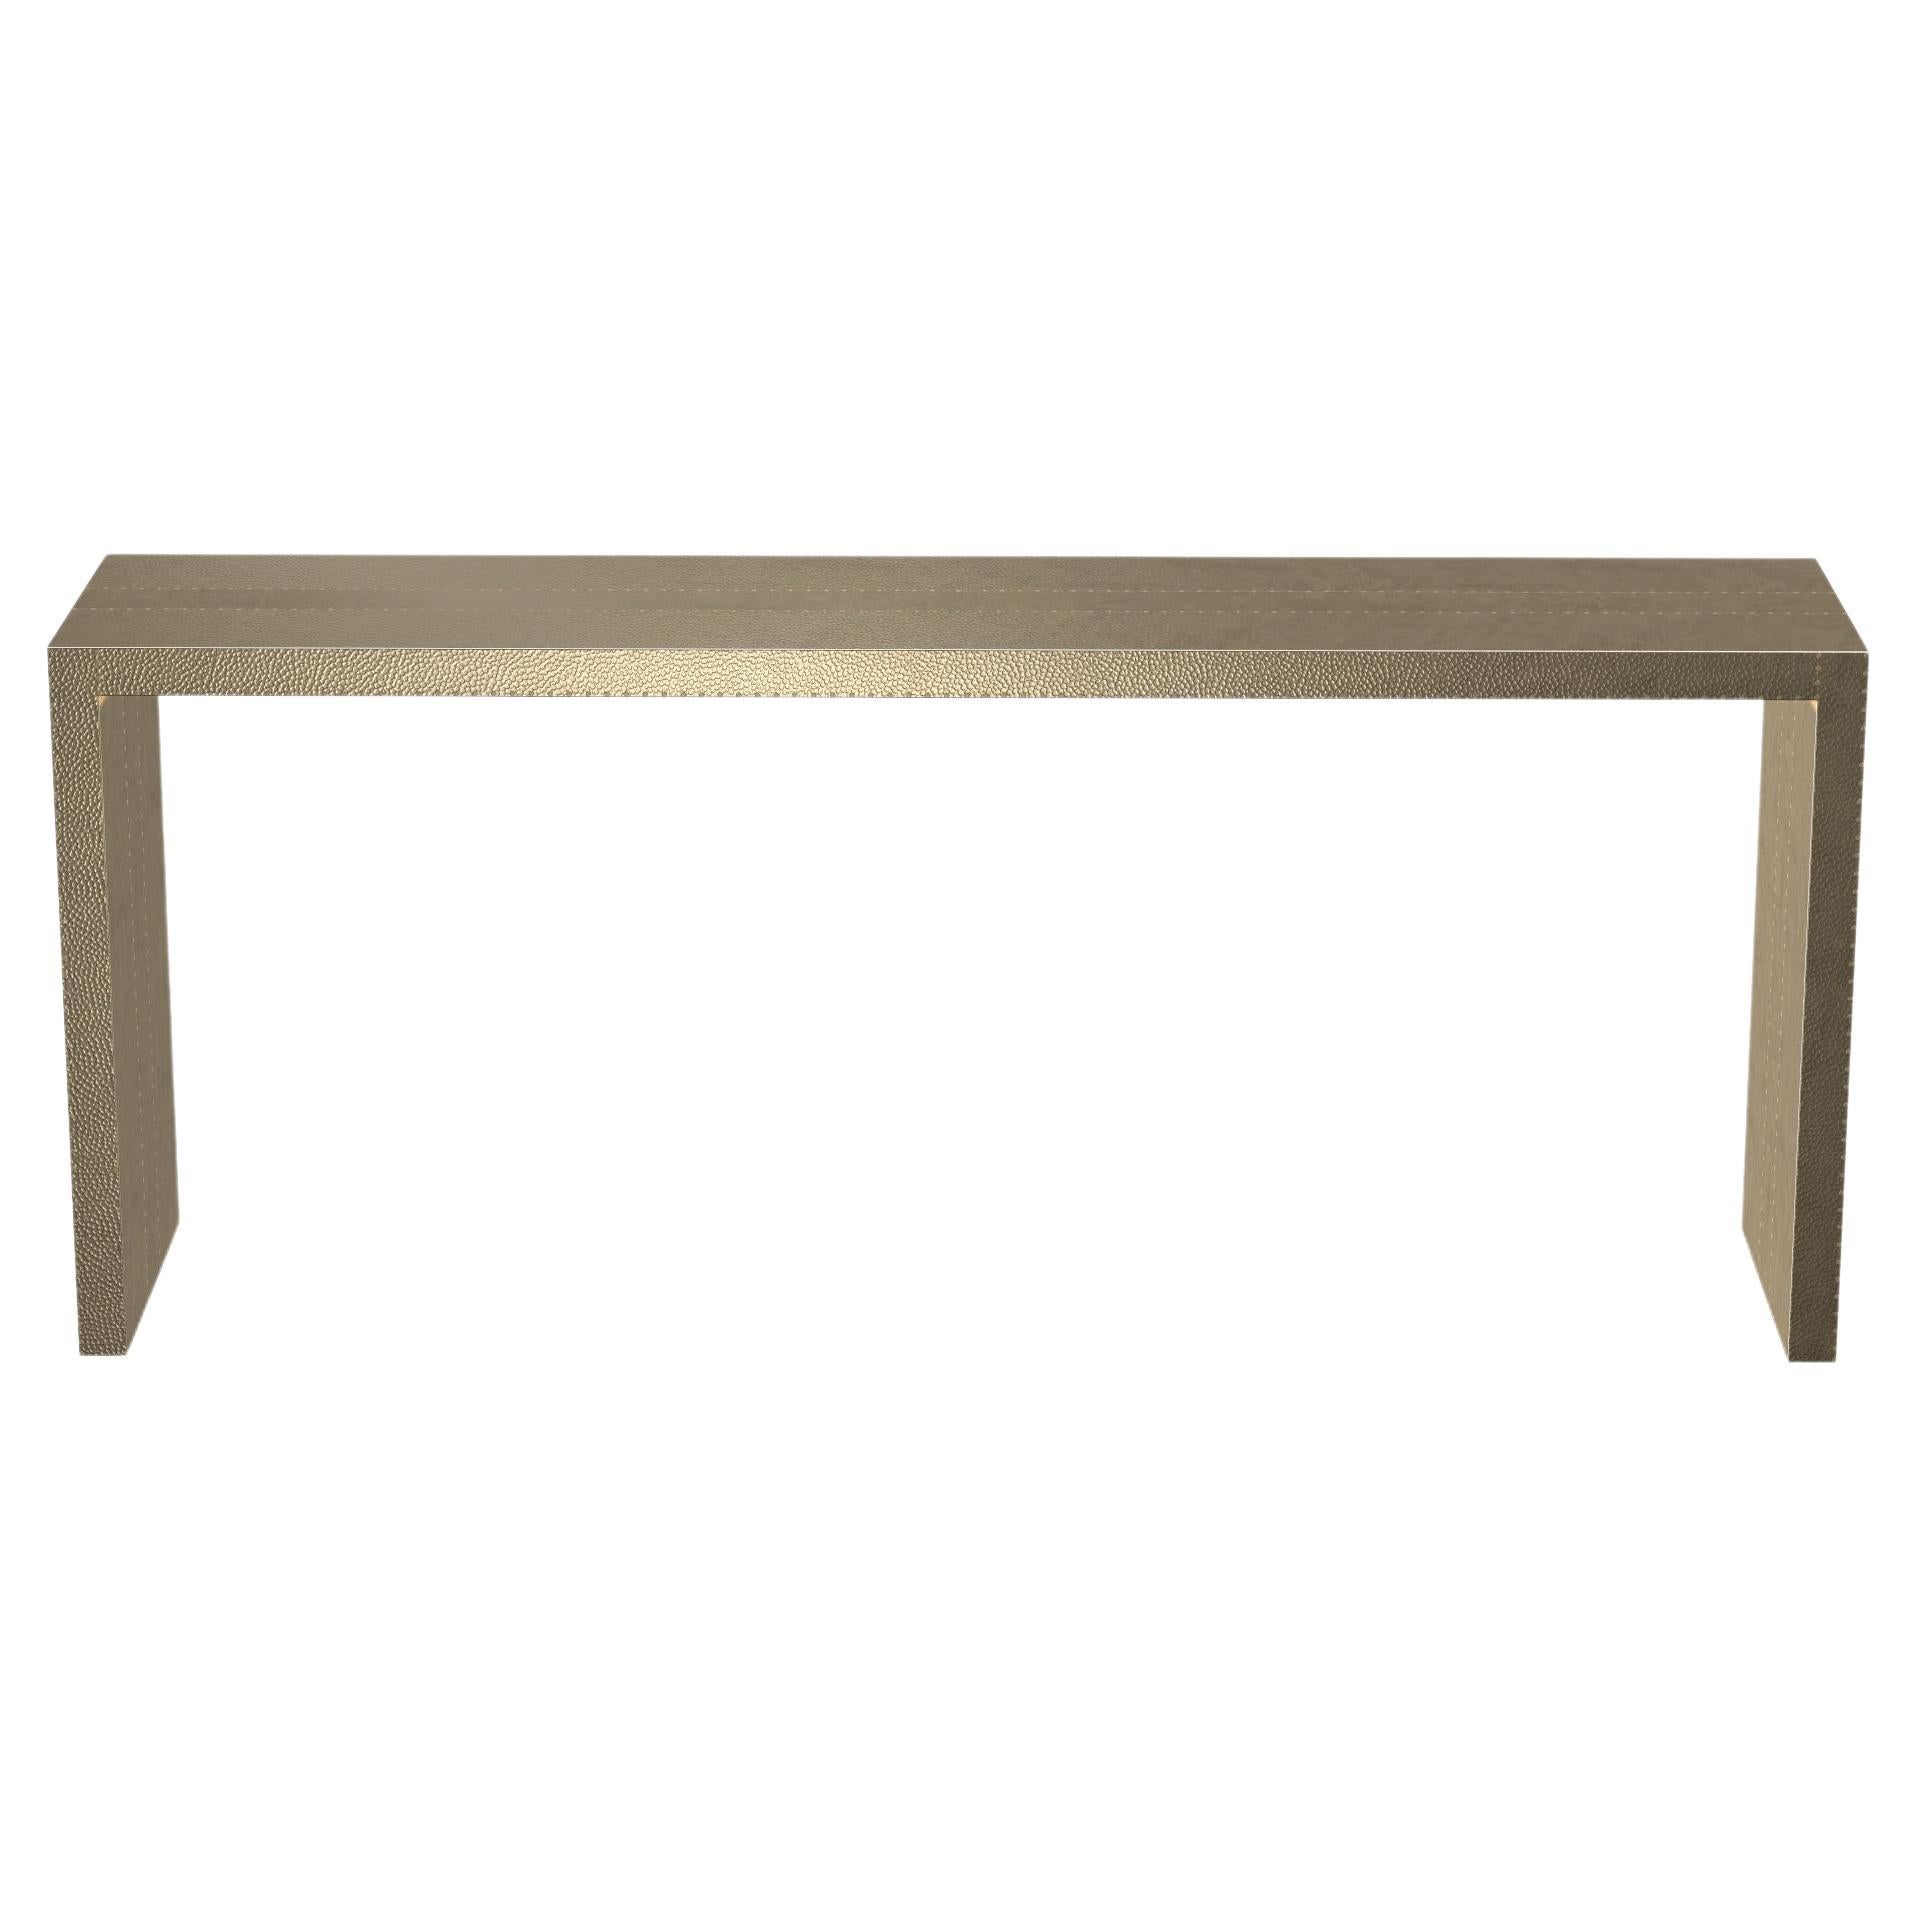 Art Deco Rectangular Console Tables Mid. Hammered Brass by Alison Spear